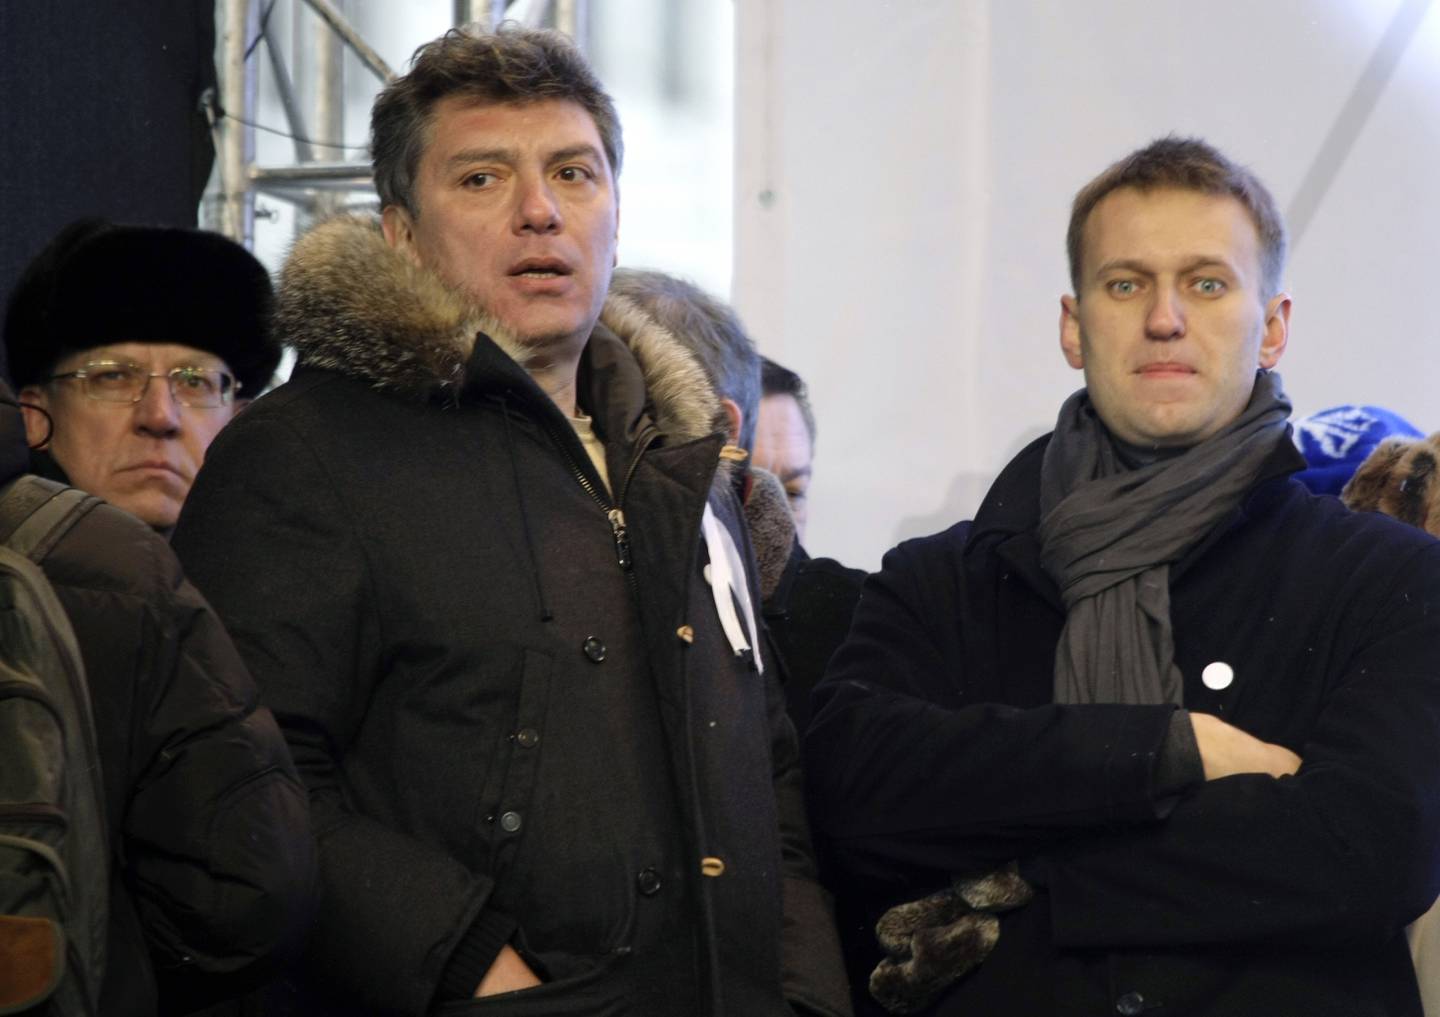 FILE - From left, Russian former Financial Minister Alexei Kudrin, leaders of the opposition Boris Nemtsov and Alexei Navalny attend a rally to protest alleged vote rigging in Russia's parliamentary elections on Sakharov avenue in Moscow, Russia on Dec. 24, 2011. Russia’s prison agency says that imprisoned opposition leader Alexei Navalny has died. He was 47. The Federal Prison Service said in a statement that Navalny felt unwell after a walk on Friday Feb. 16, 2024 and lost consciousness. (AP Photo/Misha Japaridze, File)